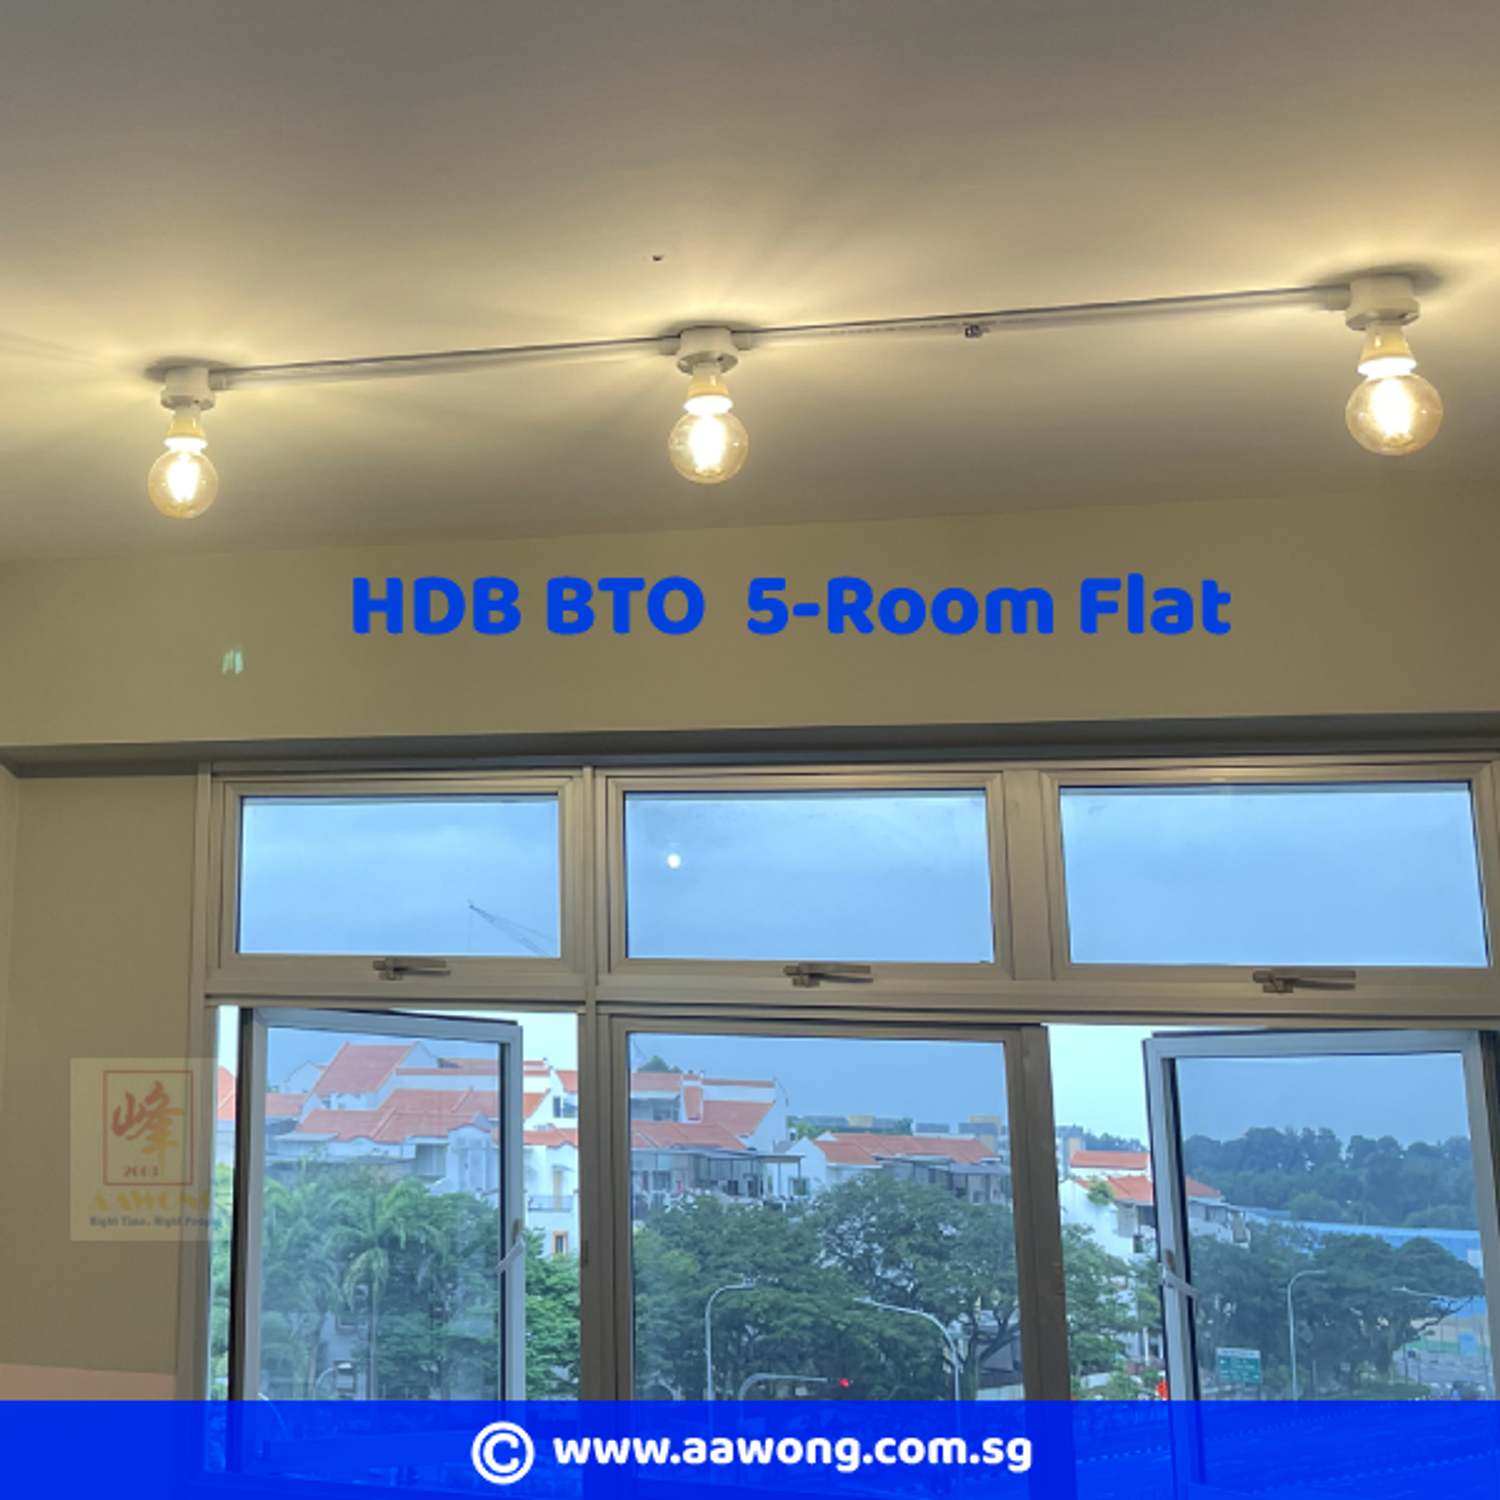 AAWONG Engineering - Bedok South Blk153A – Aircon and Electrical Project